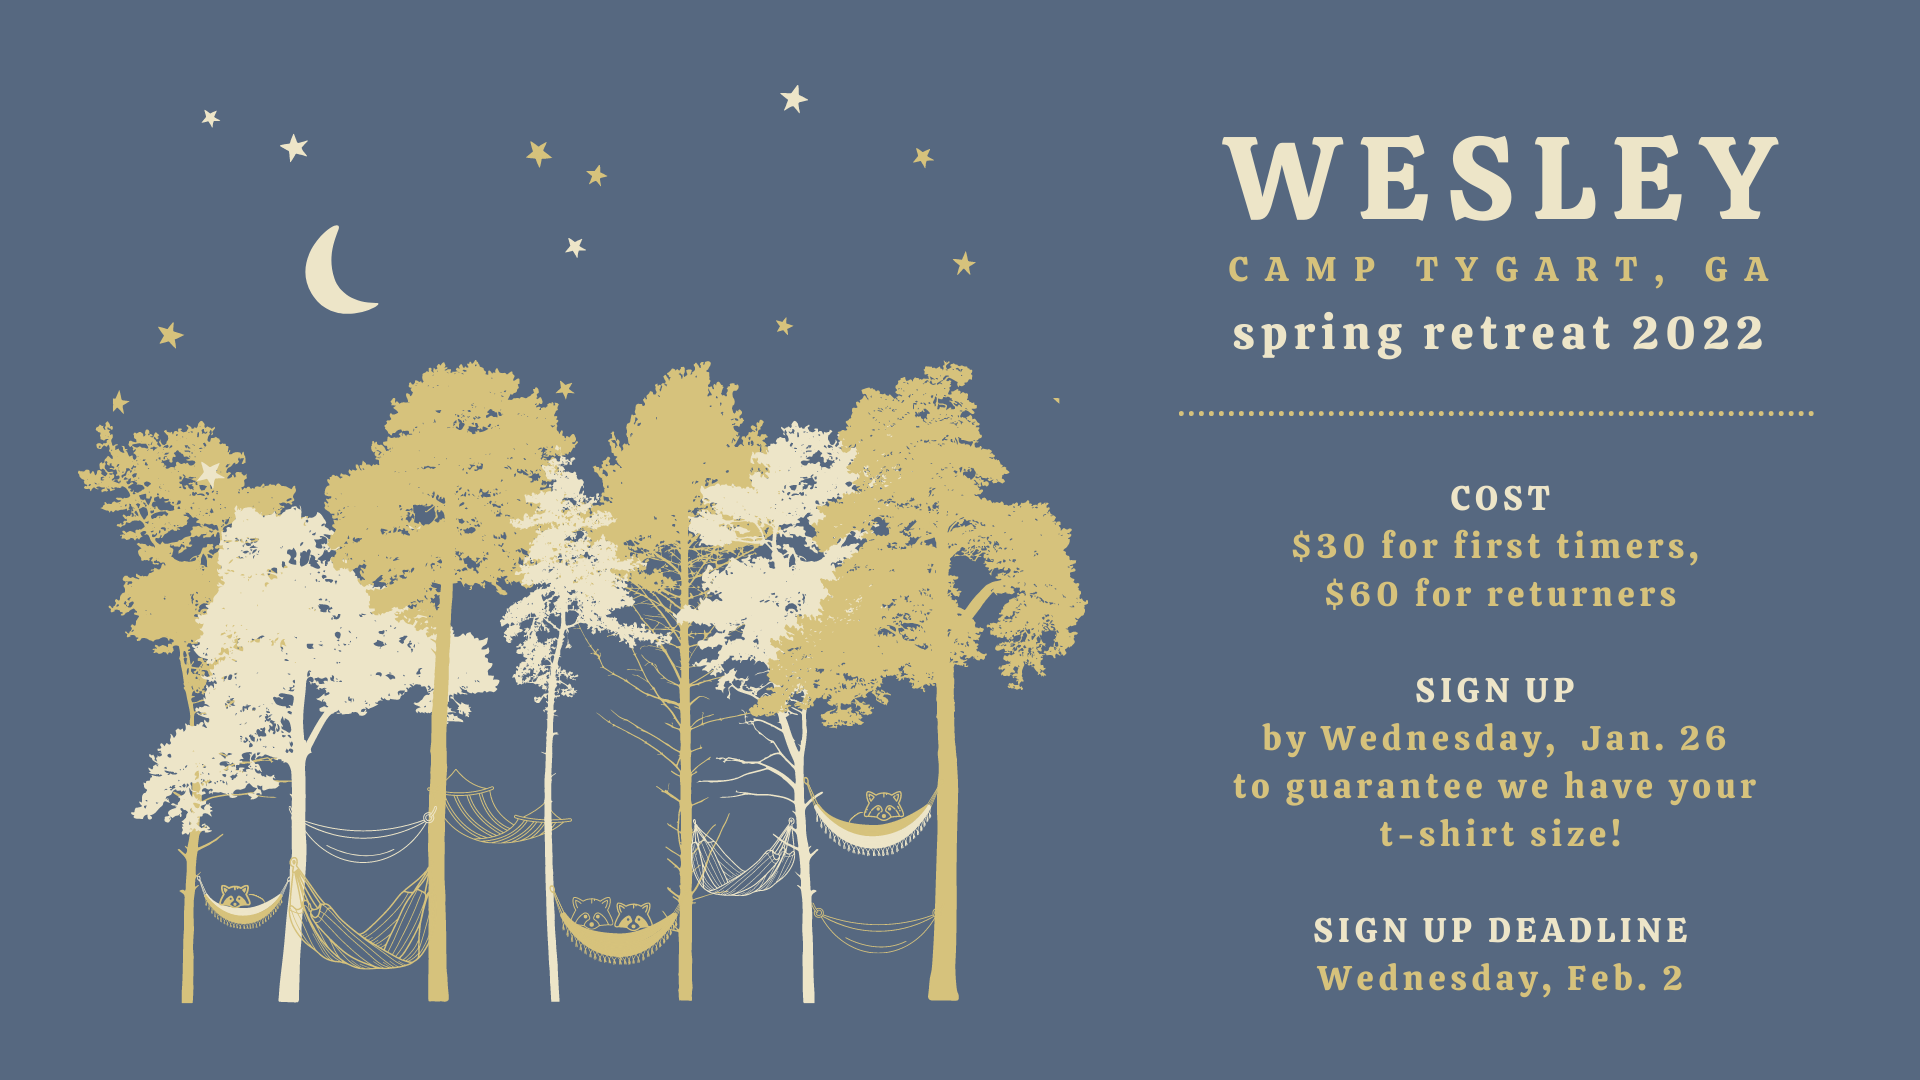 Sign-ups are OPEN for Wesley Spring Retreat!